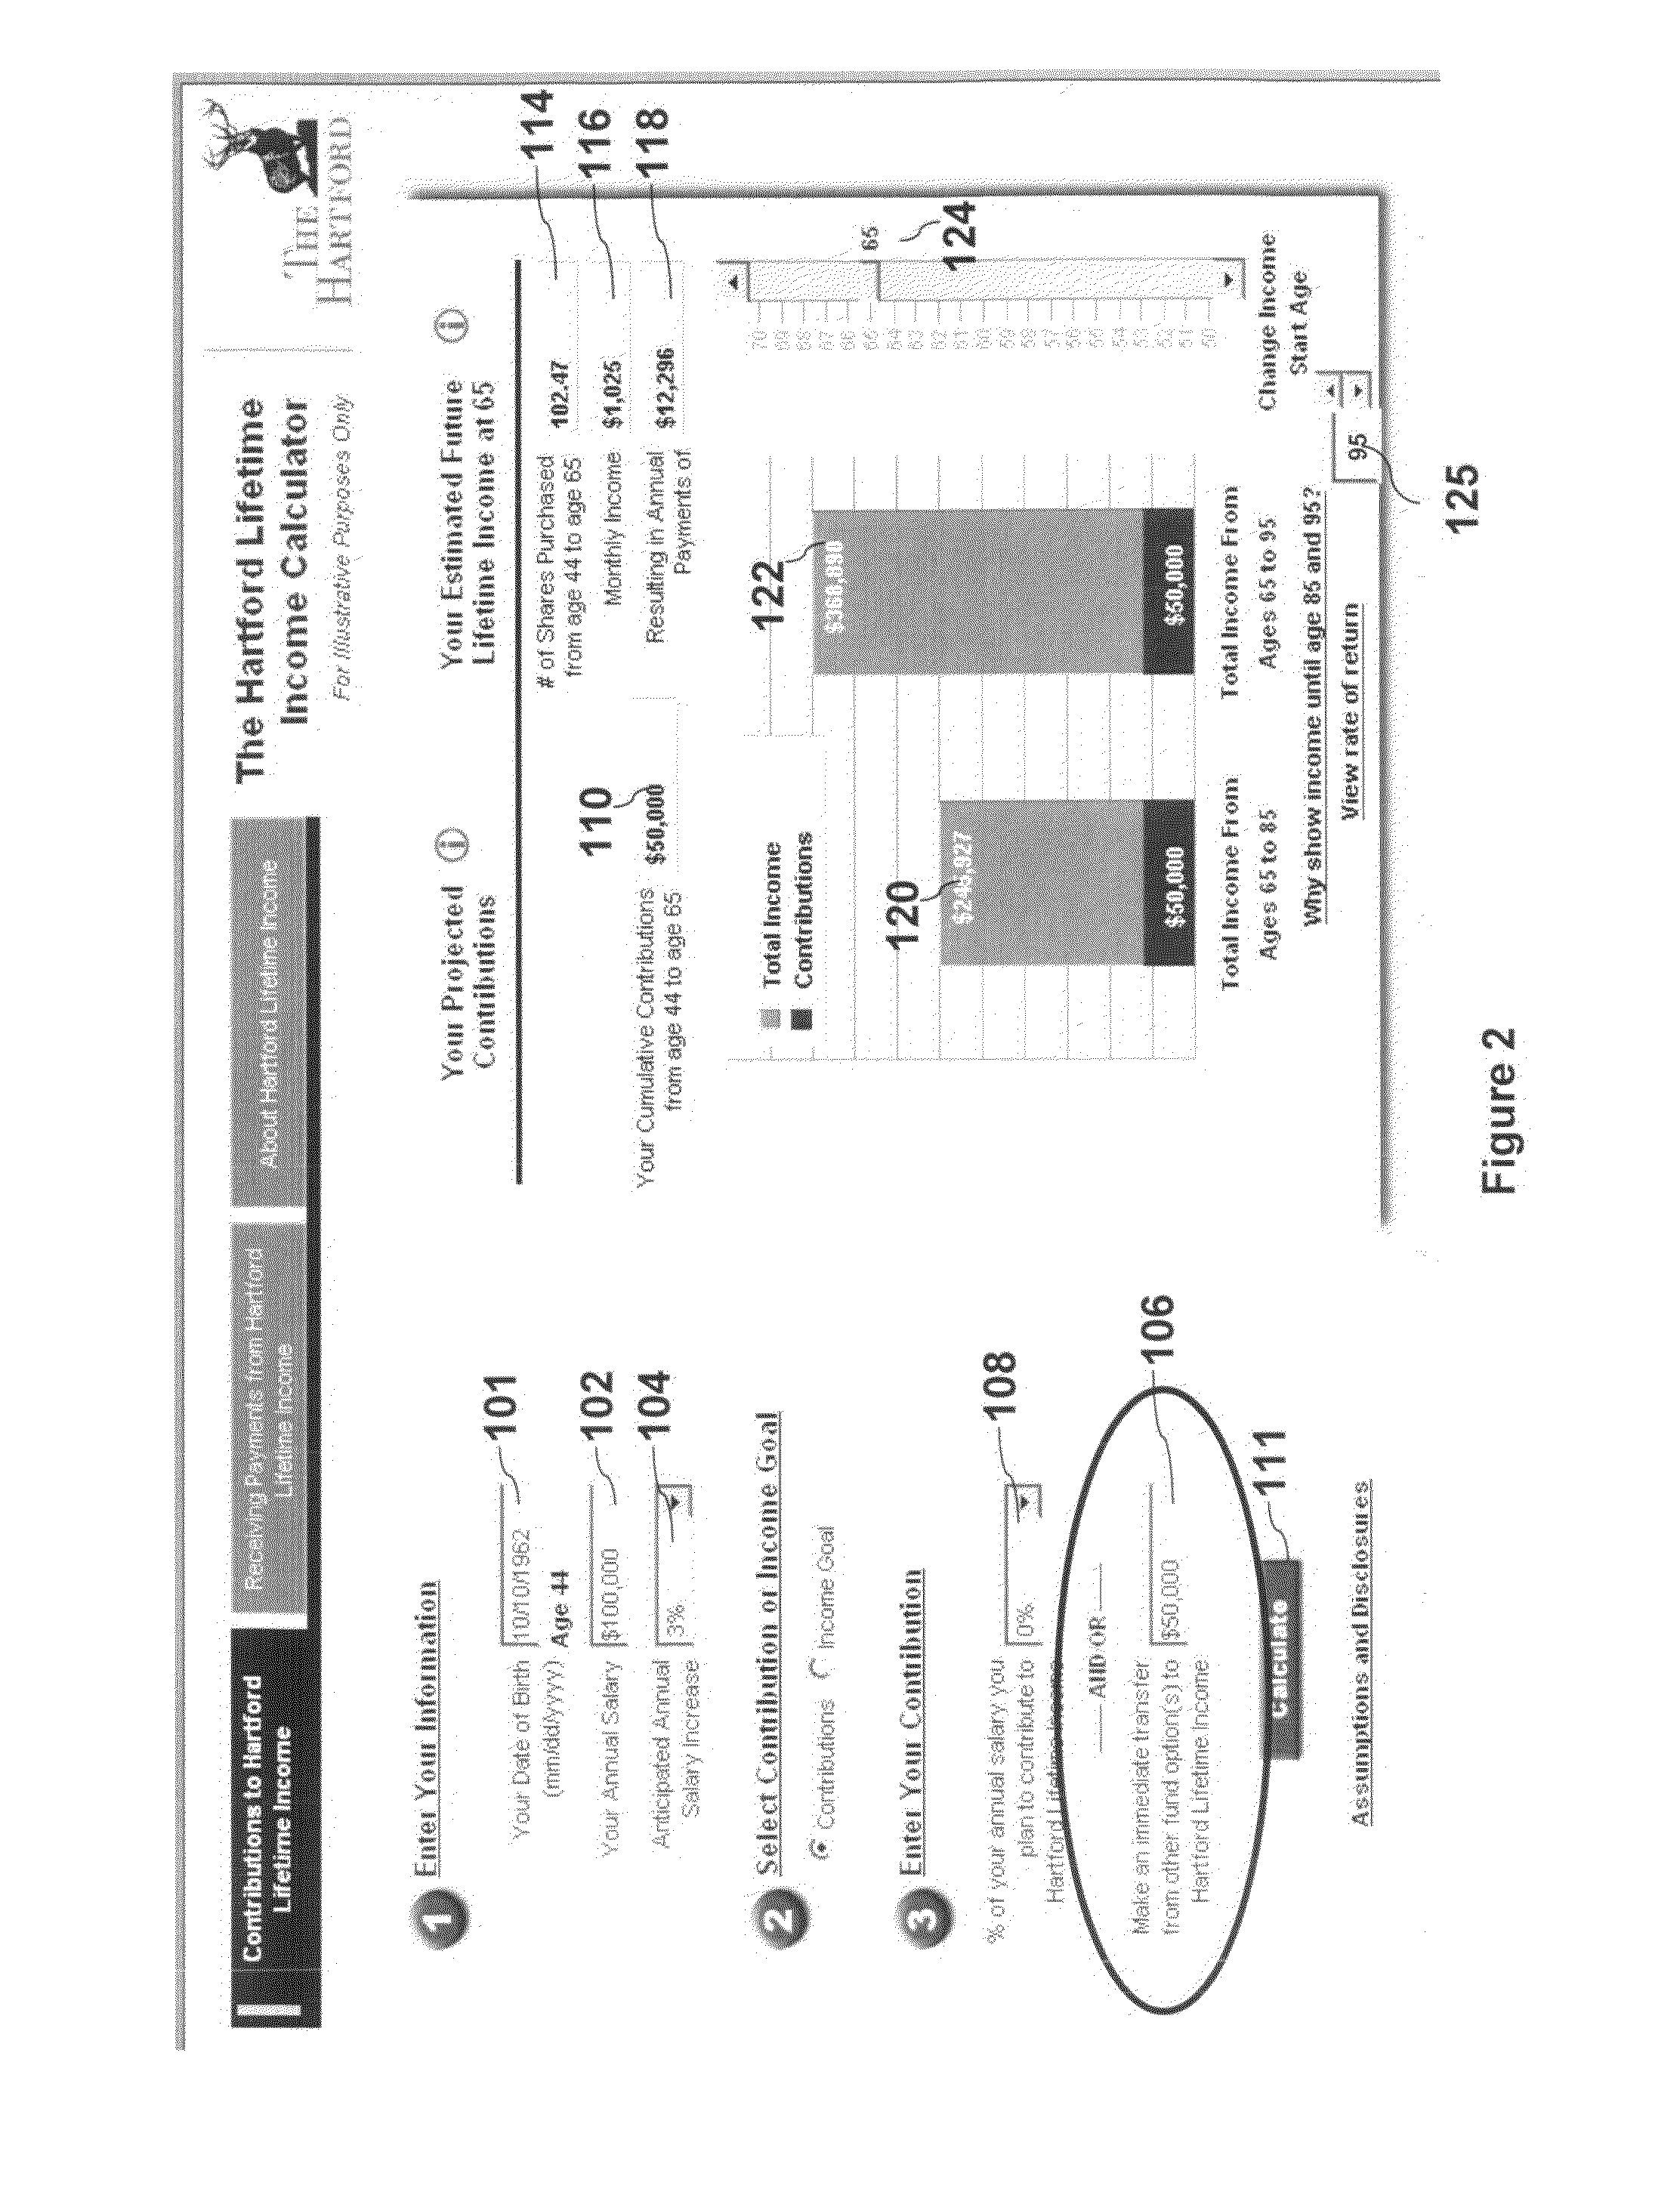 System and method for administering a lifetime income share plan